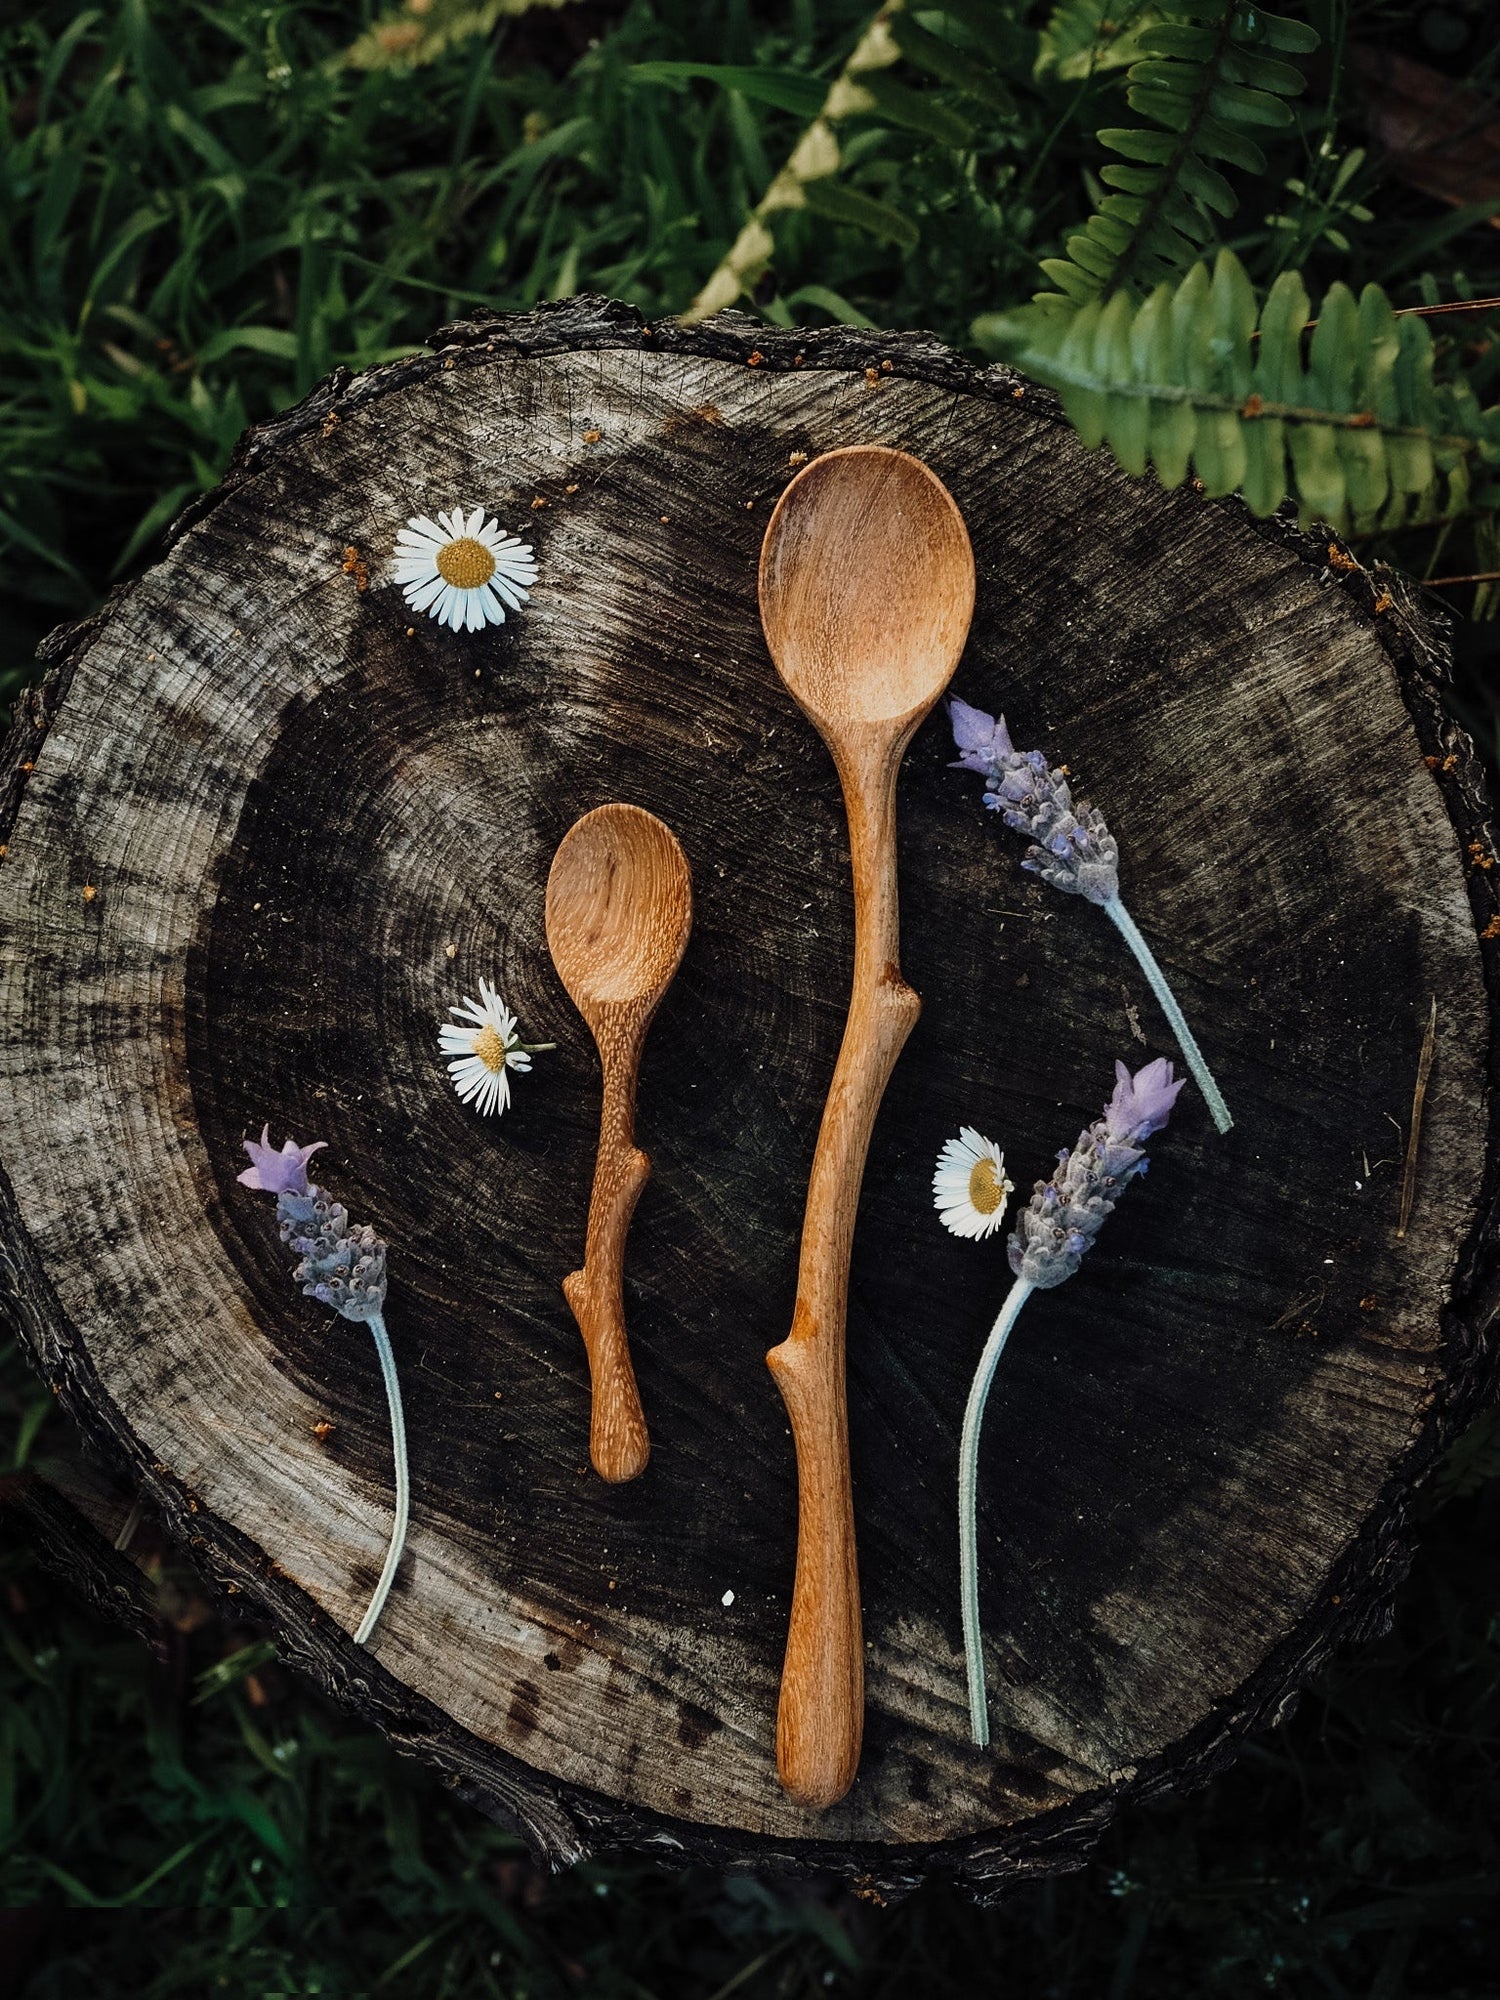 WILD MOUNTAIN CHILD | HANDCRAFTED TWIGGY SPOON (MINI TWIG SPOON) by WILD MOUNTAIN CHILD - The Playful Collective